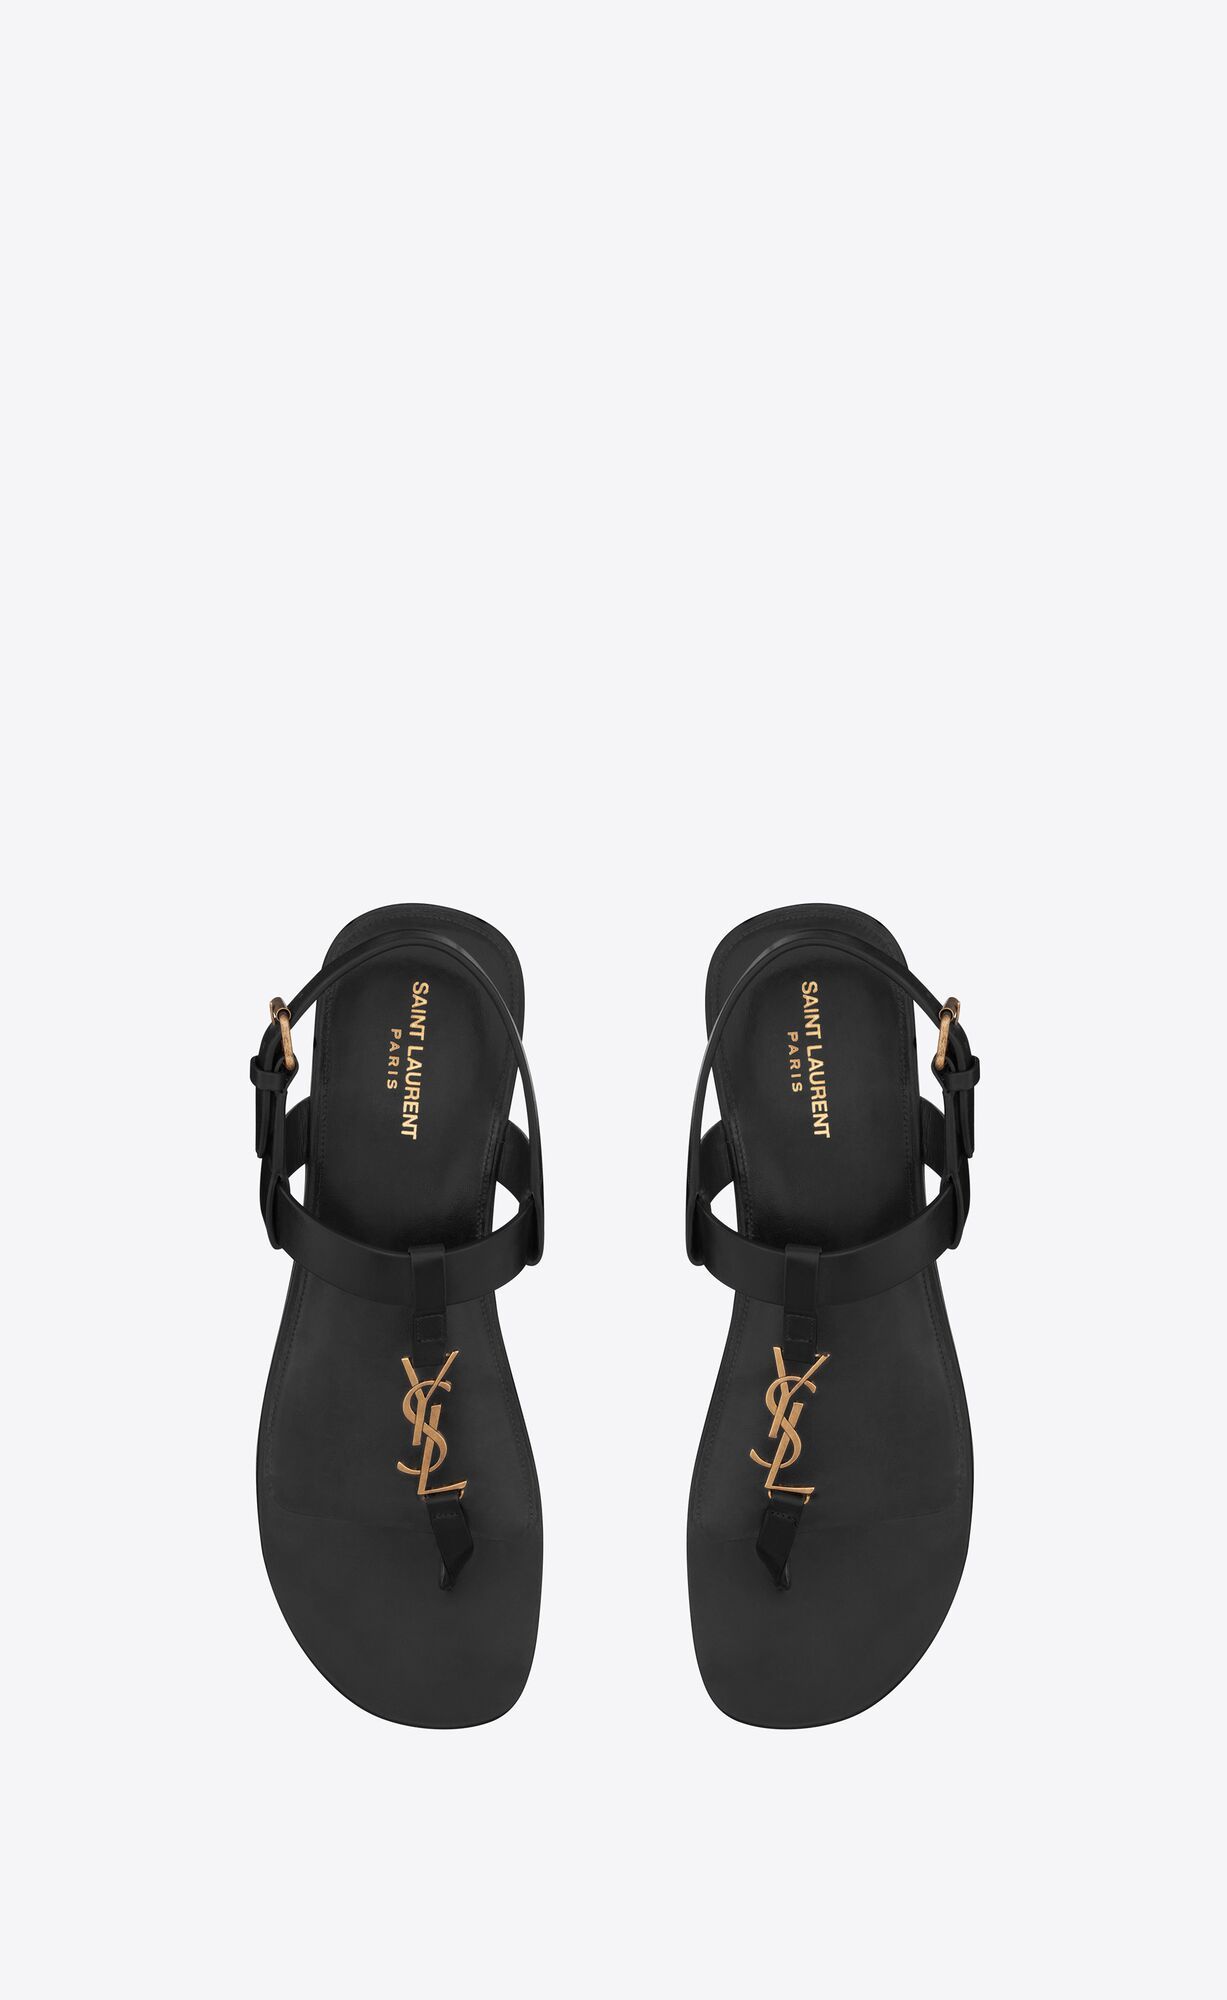 FLAT SANDALS MADE WITH METAL FREE TANNED LEATHER, WITH A T-STRAP ARCH BAND AND AN ADJUSTABLE BUCK... | Saint Laurent Inc. (Global)